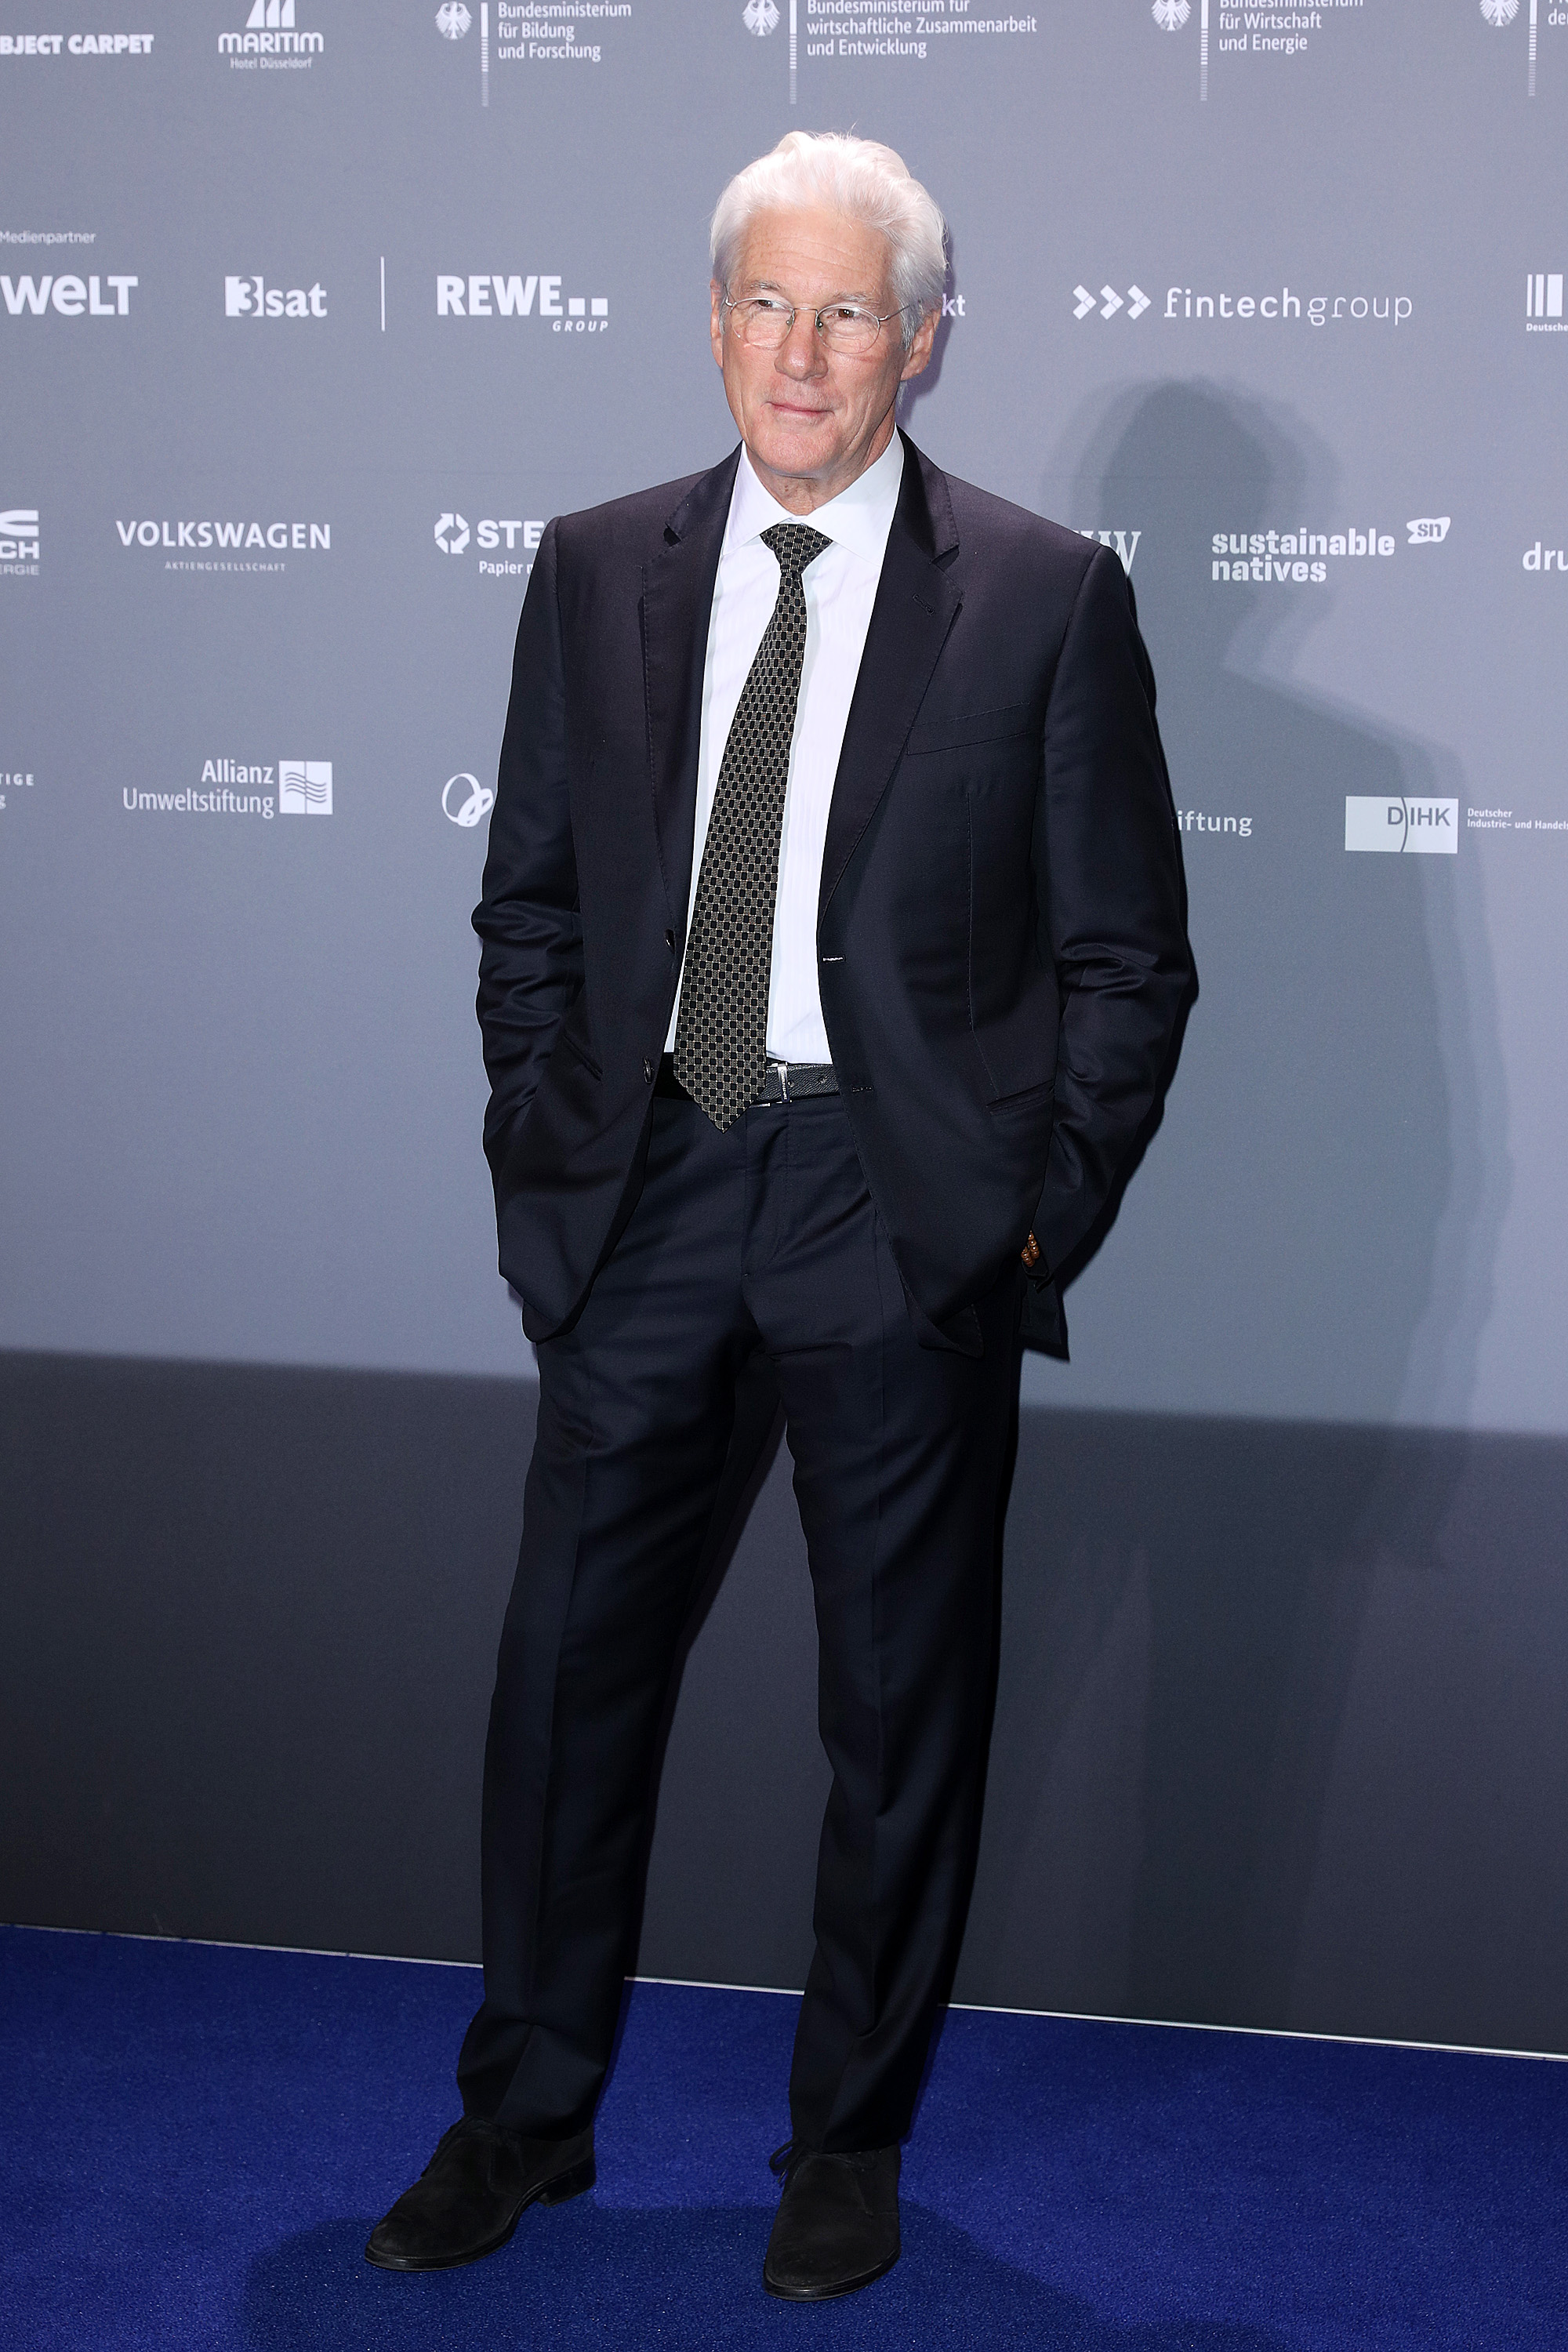 Richard Gere at the German Sustainability Award in Duesseldorf, Germany on December 7, 2018 | Source: Getty Images